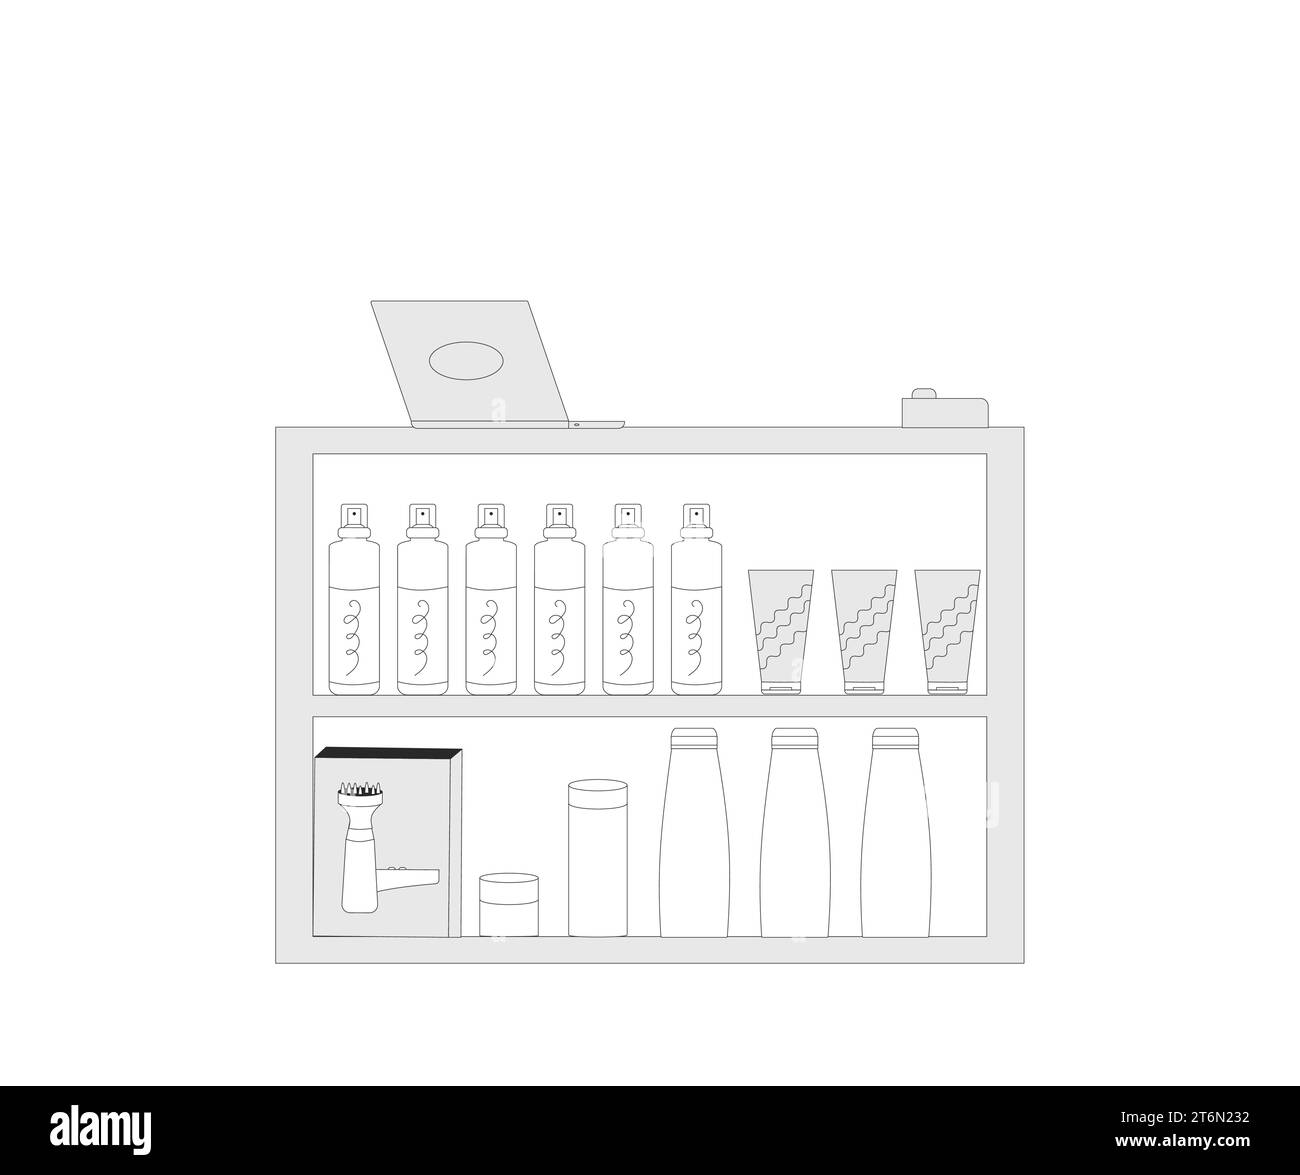 https://c8.alamy.com/comp/2T6N232/hair-care-store-corner-cosmetic-section-with-conditioners-shampoo-and-hair-treatment-counter-vector-illustration-2T6N232.jpg